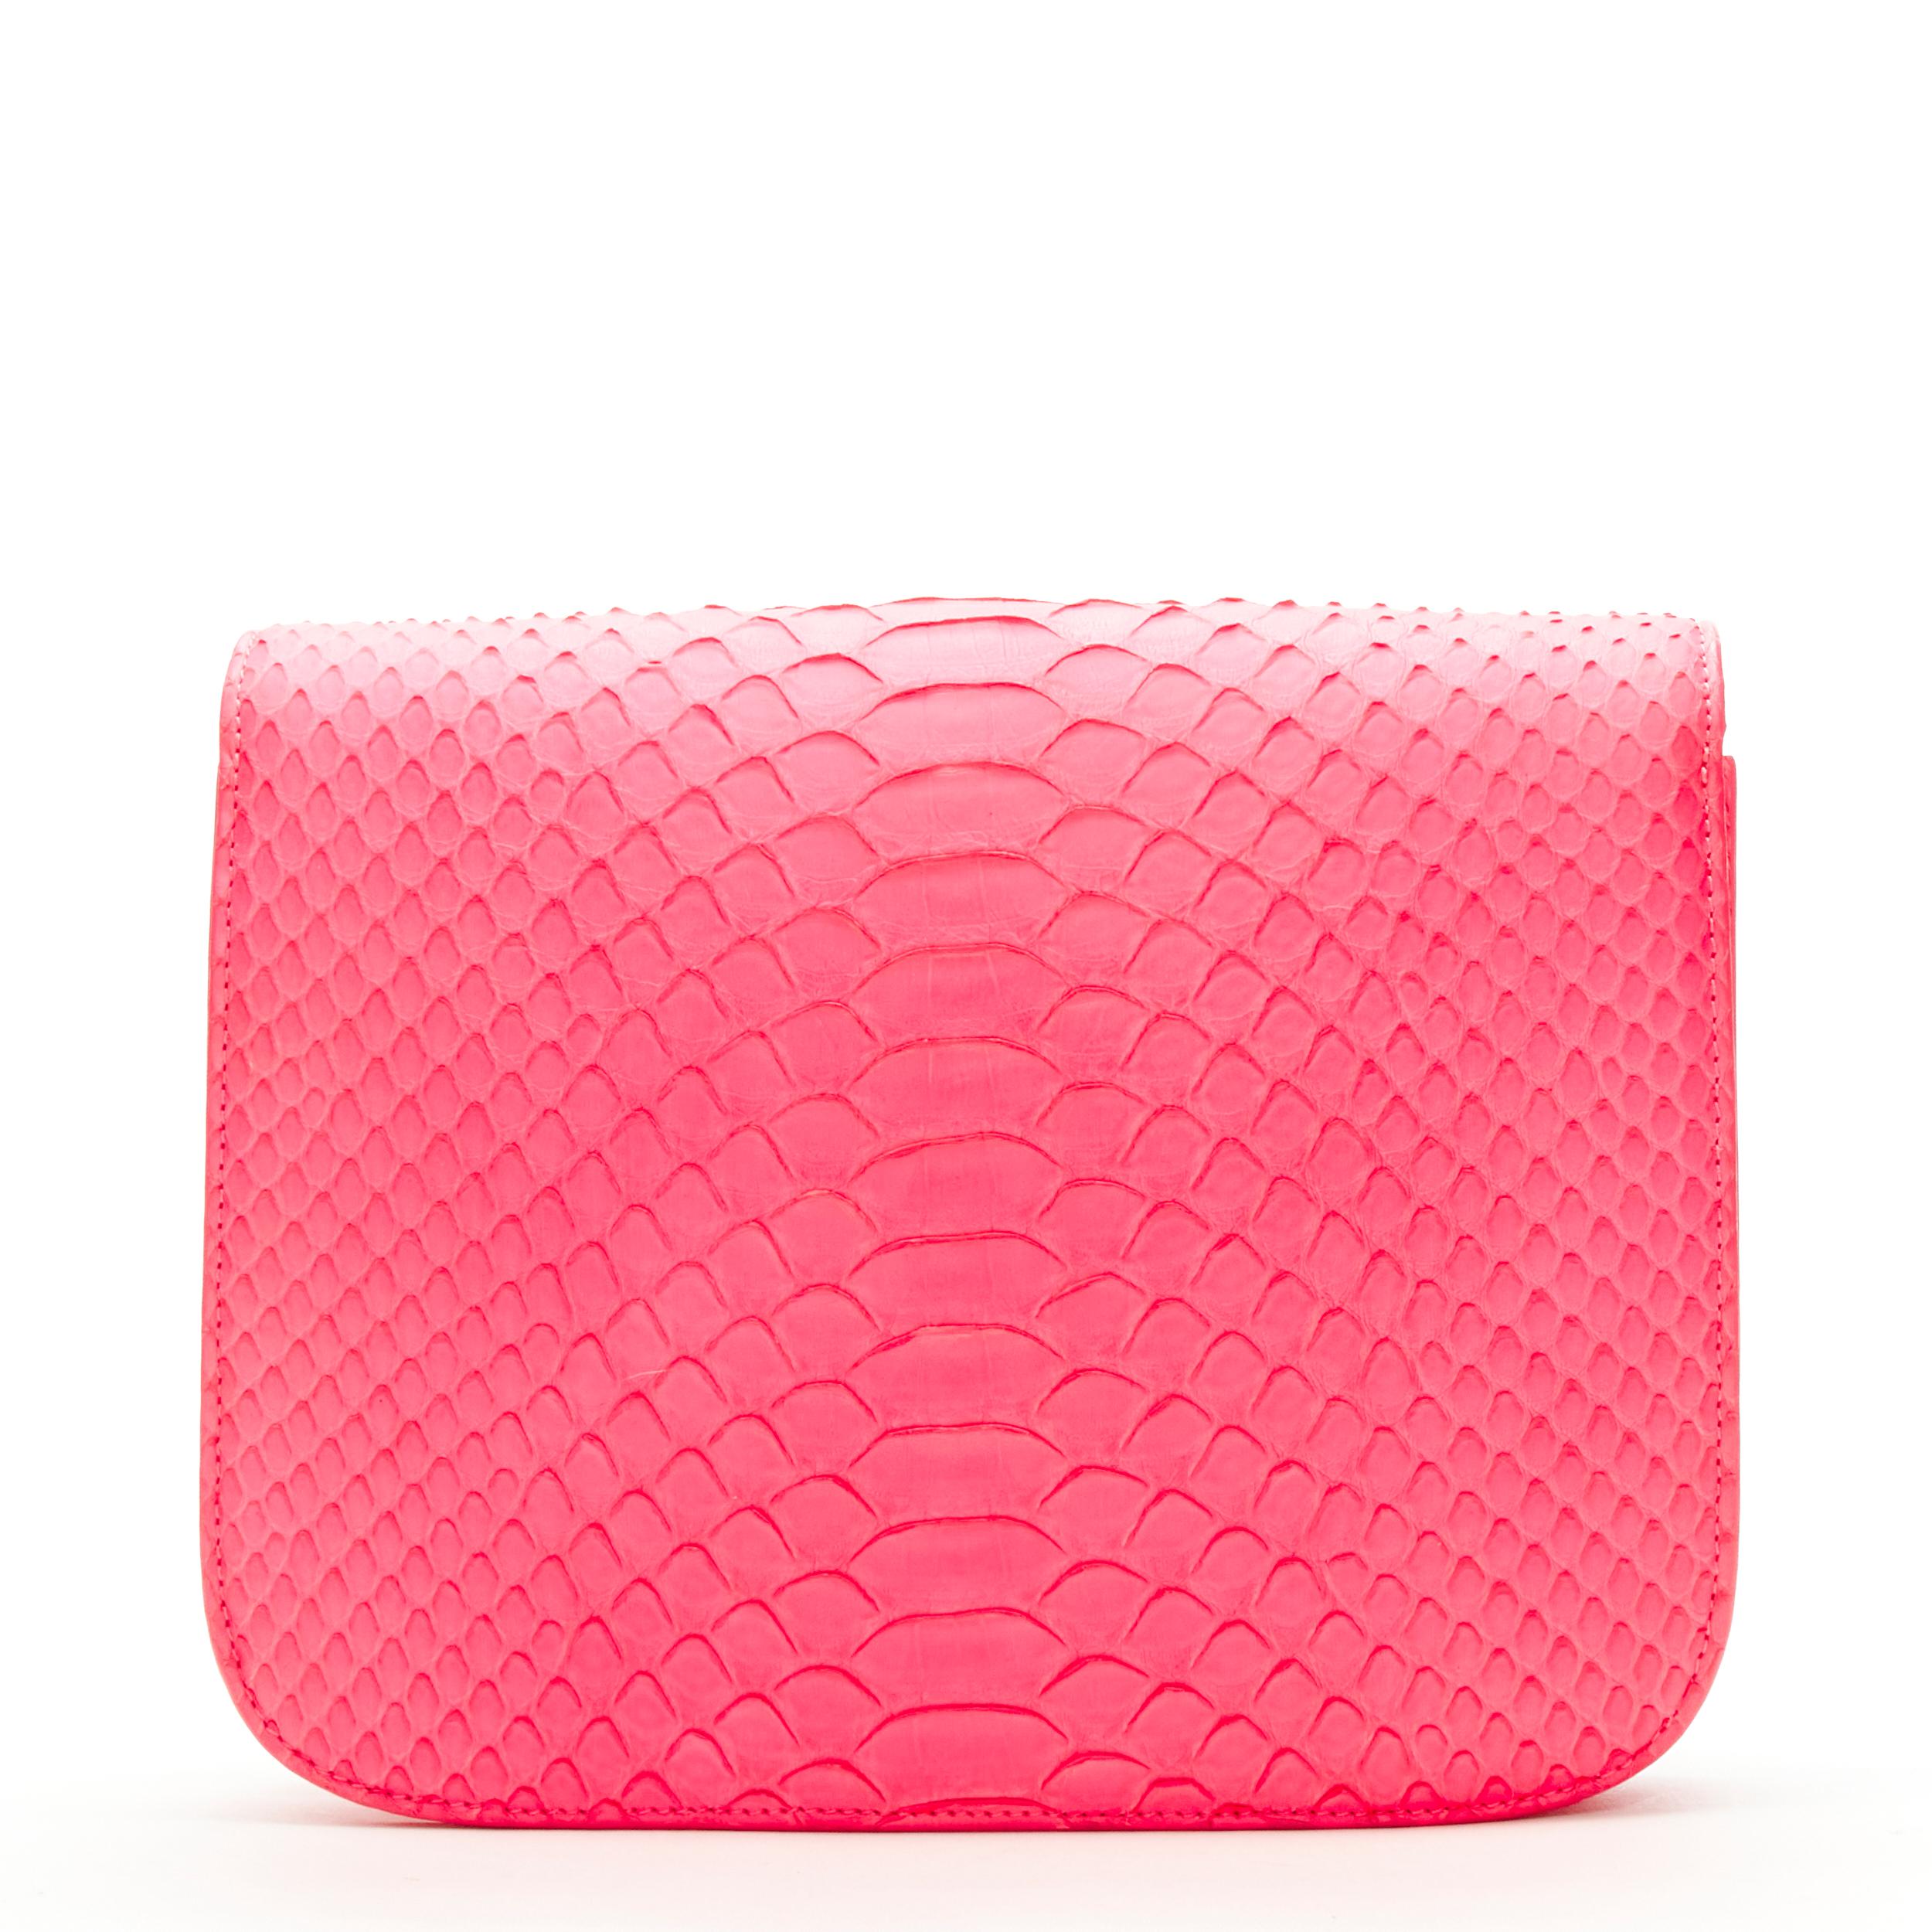 OLD CELINE Medium Classic Box Bag neon pink scaled leather flap crossbody For Sale 1